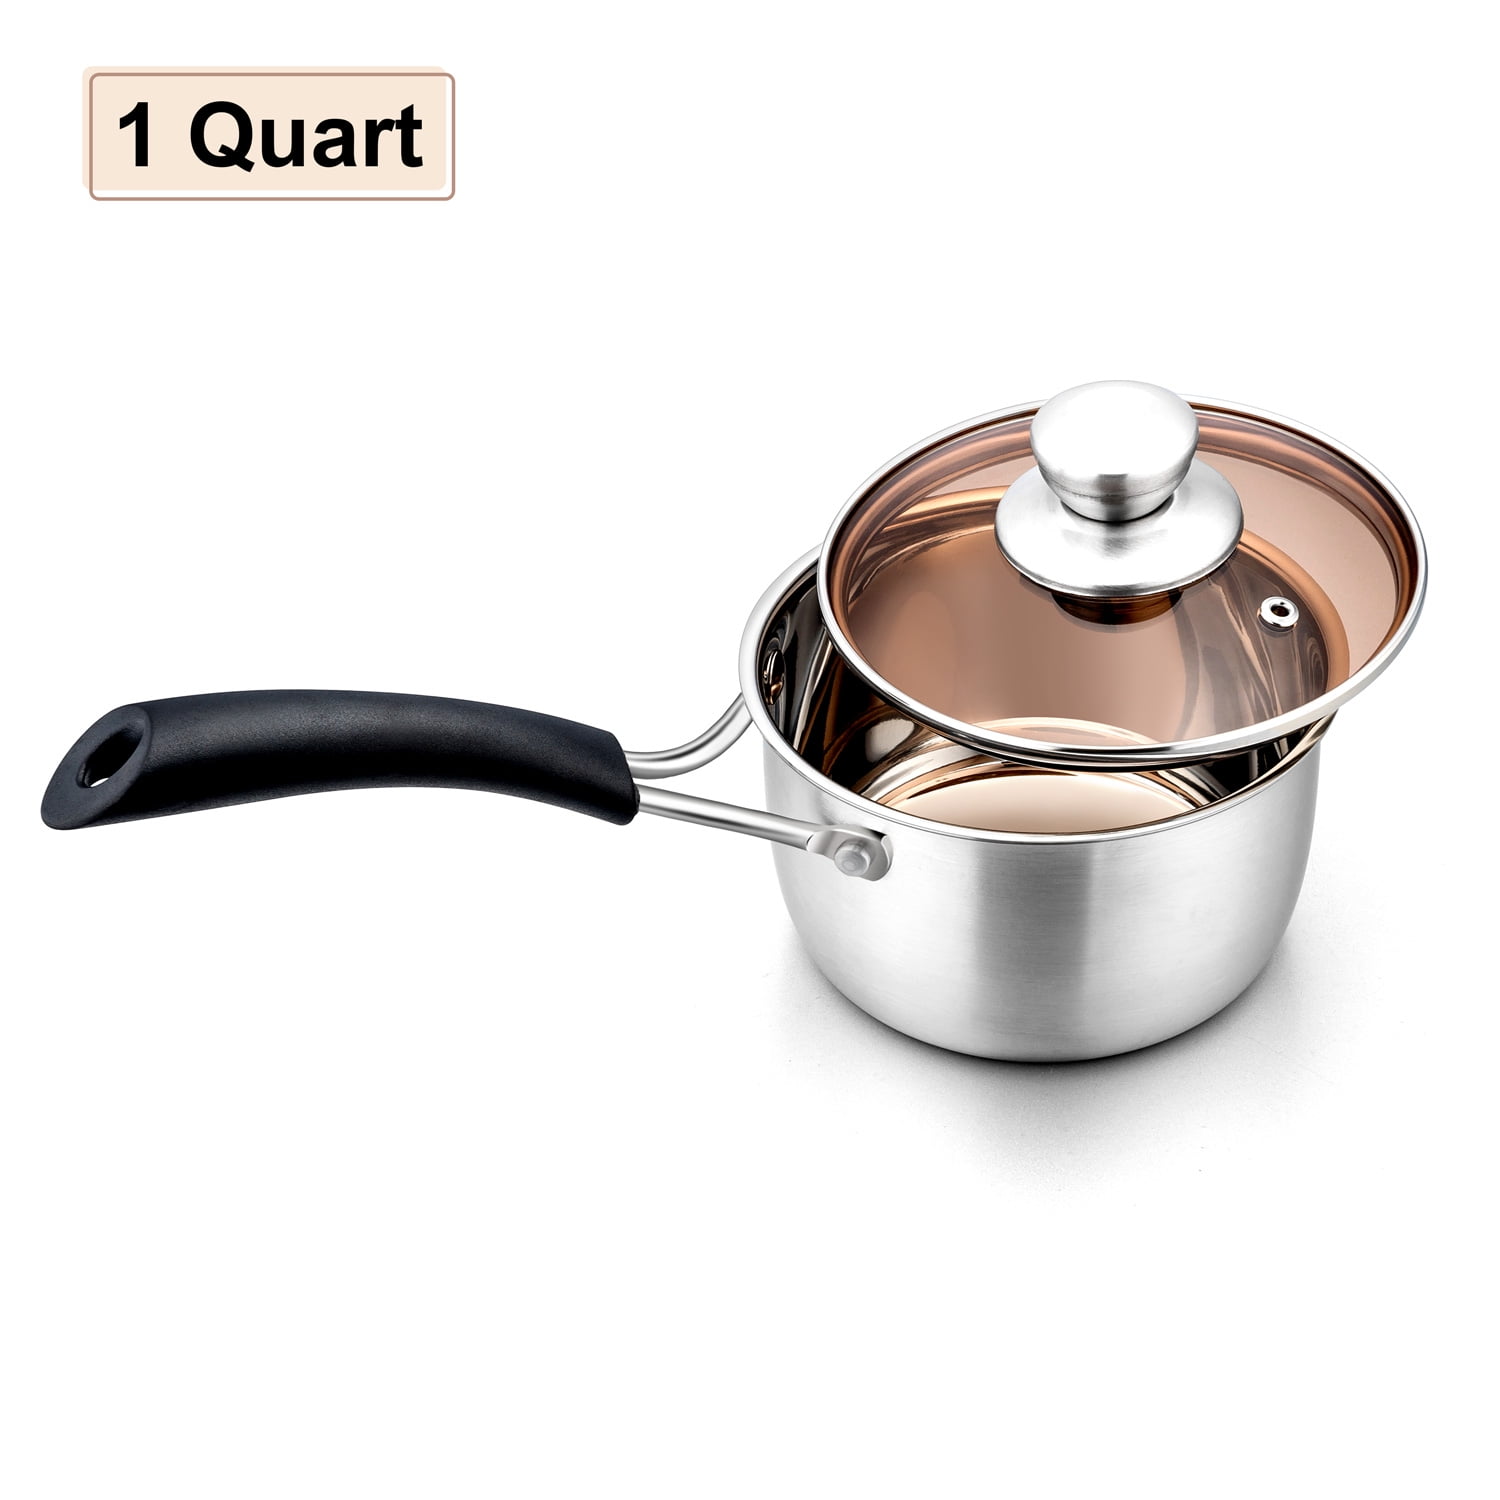 Small Saucepan with Lid, E-far Stainless Steel Max Capacity 2 Quart Sauce  Pot with Glass Lid for Cooking, Easy Clean & Rust Free, Dishwasher Safe